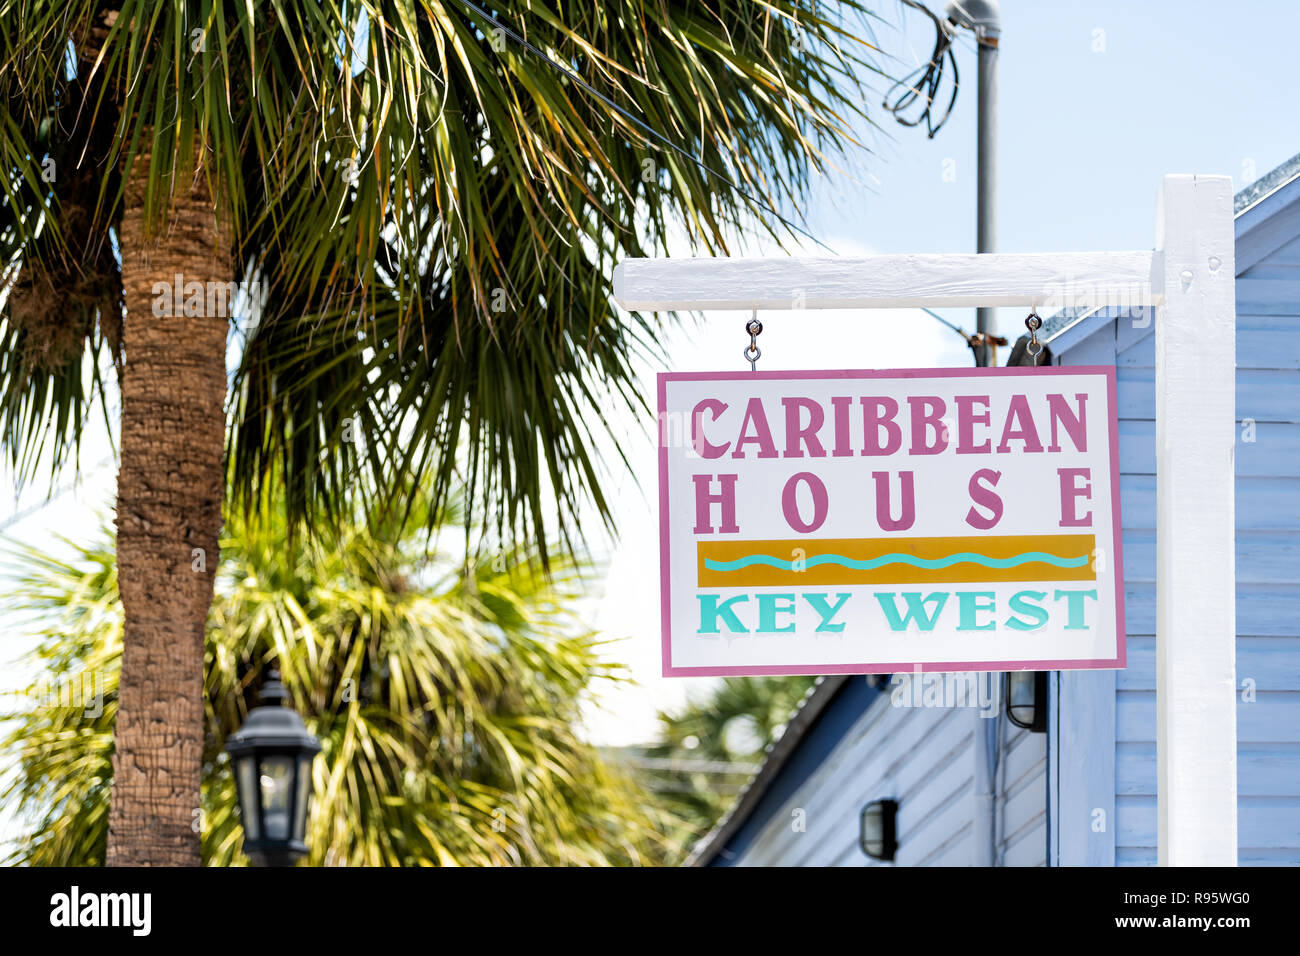 Key West, USA - May 1, 2018: Caribbean House bed and breakfast hotel ...